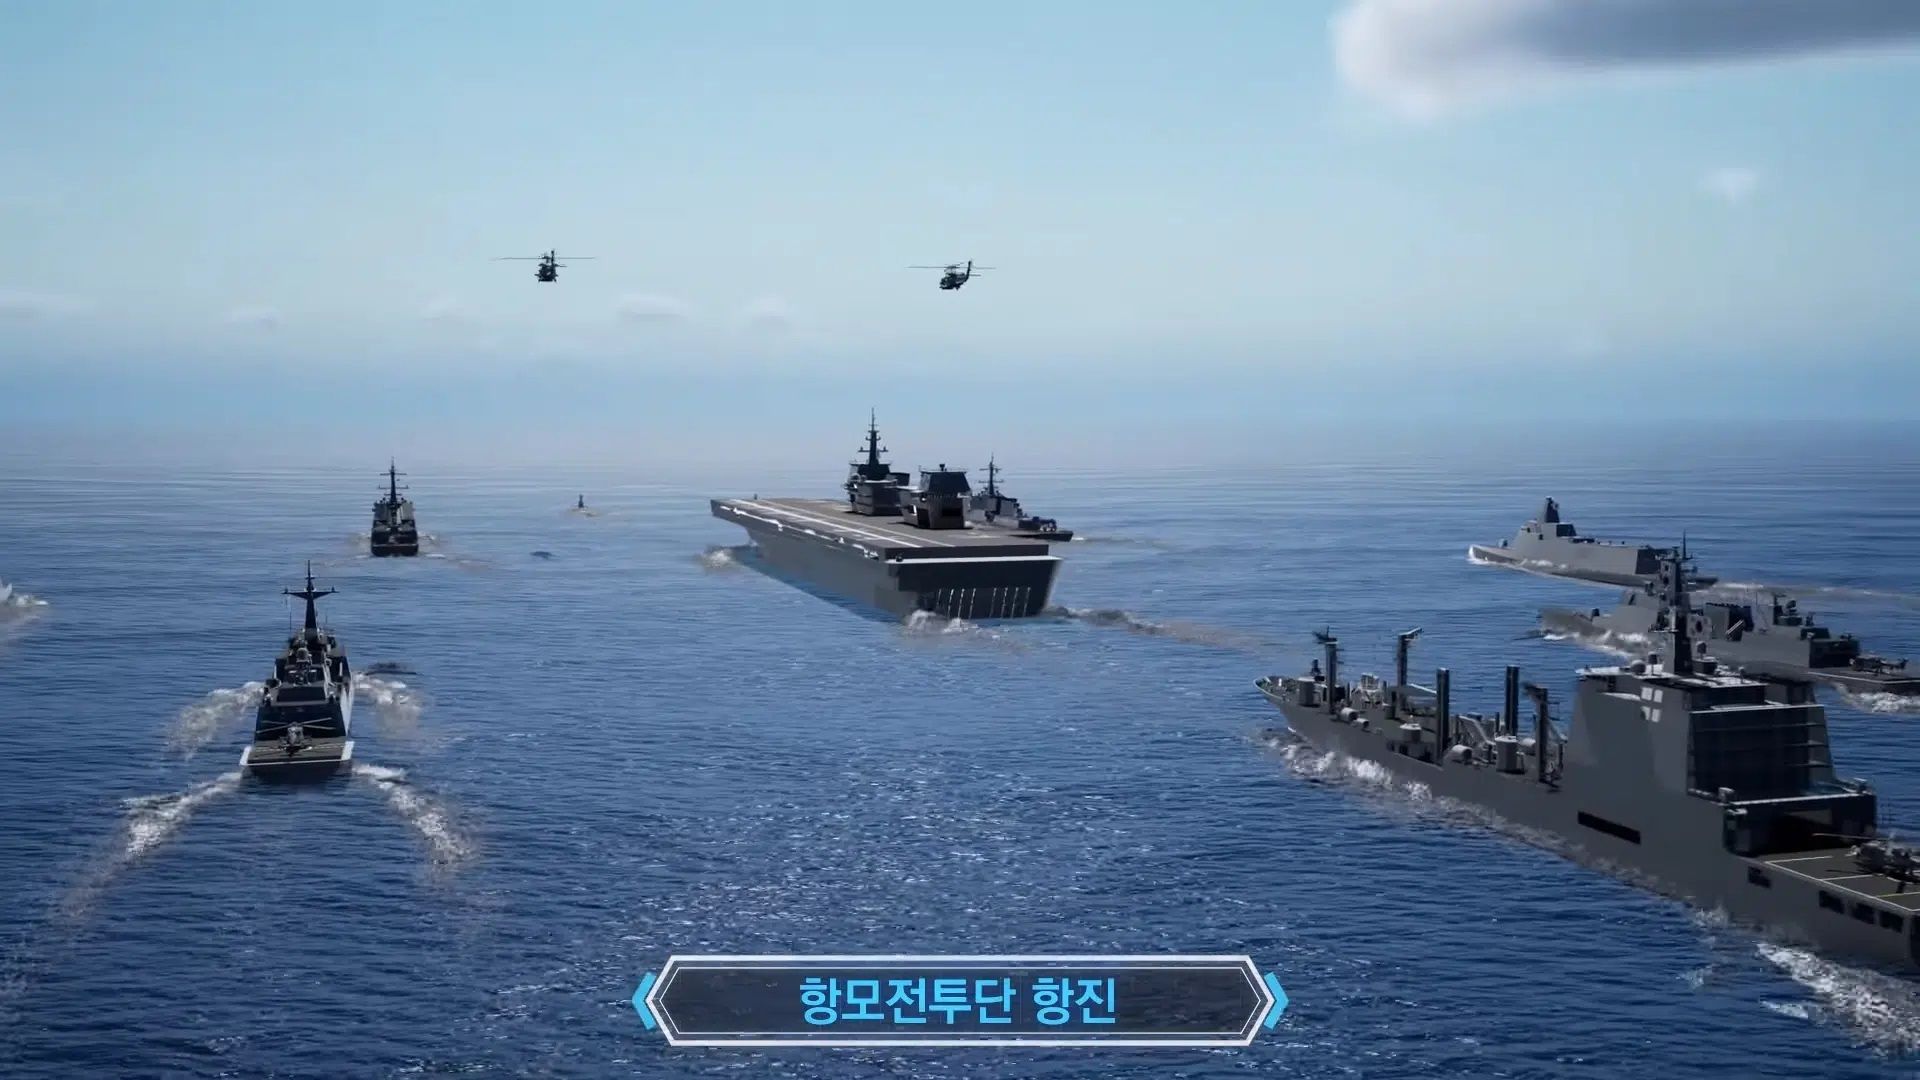 ROK’s carrier project is delayed, no funding in the budget